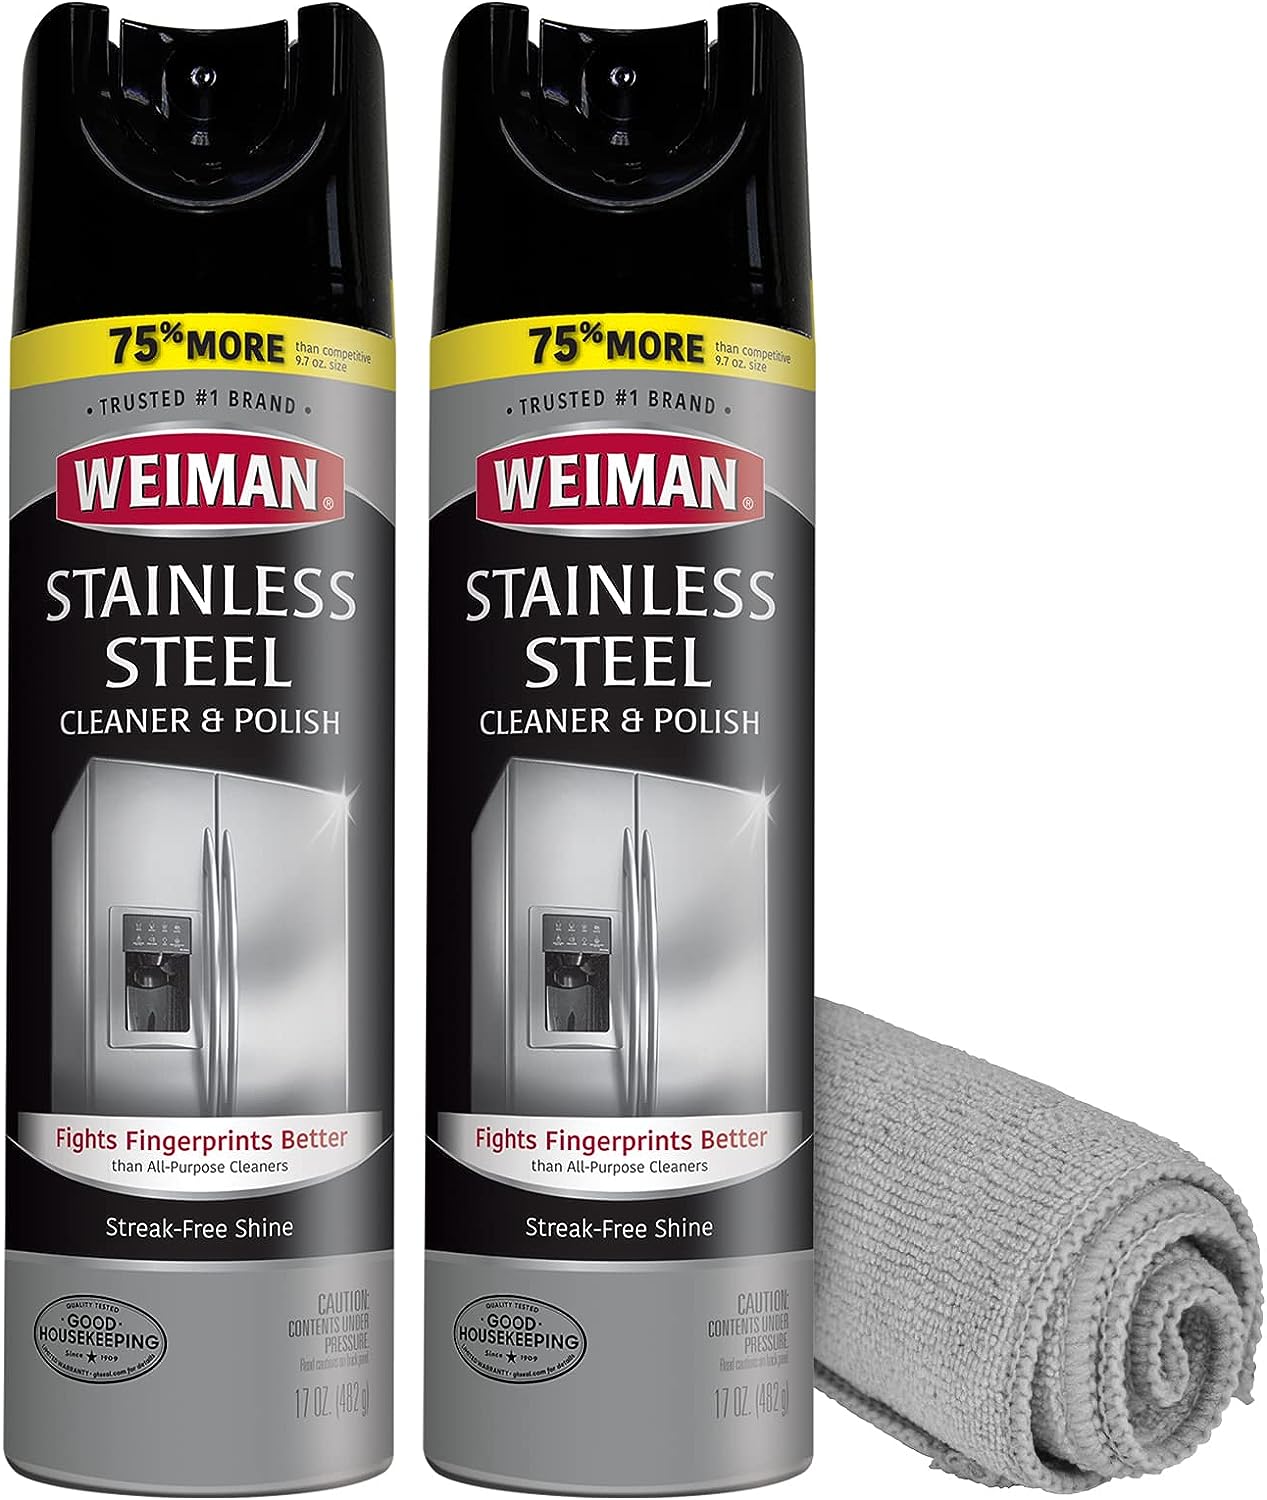 Weiman Stainless Steel Cleaner & Polish Protects [...]